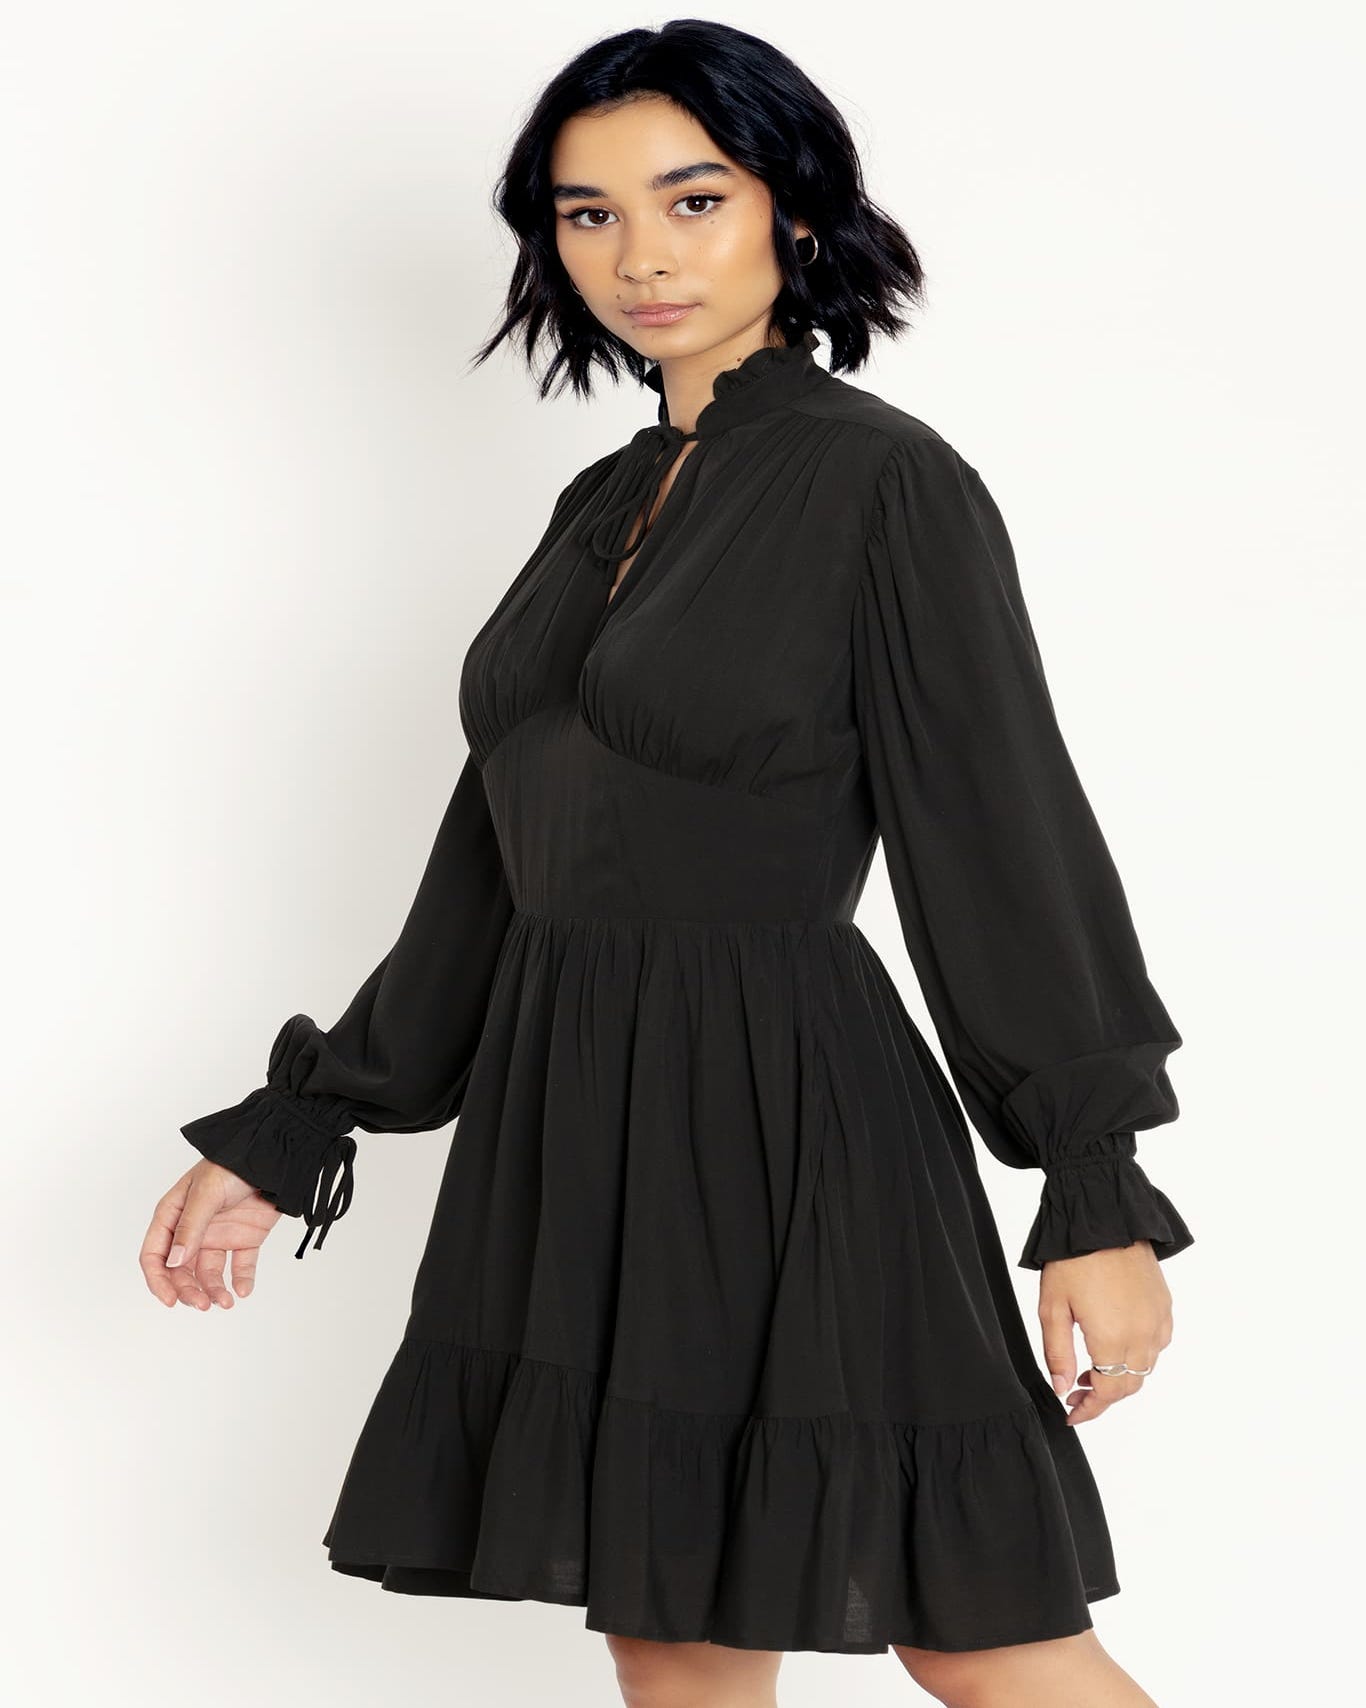 Good Witch Dress - Limited